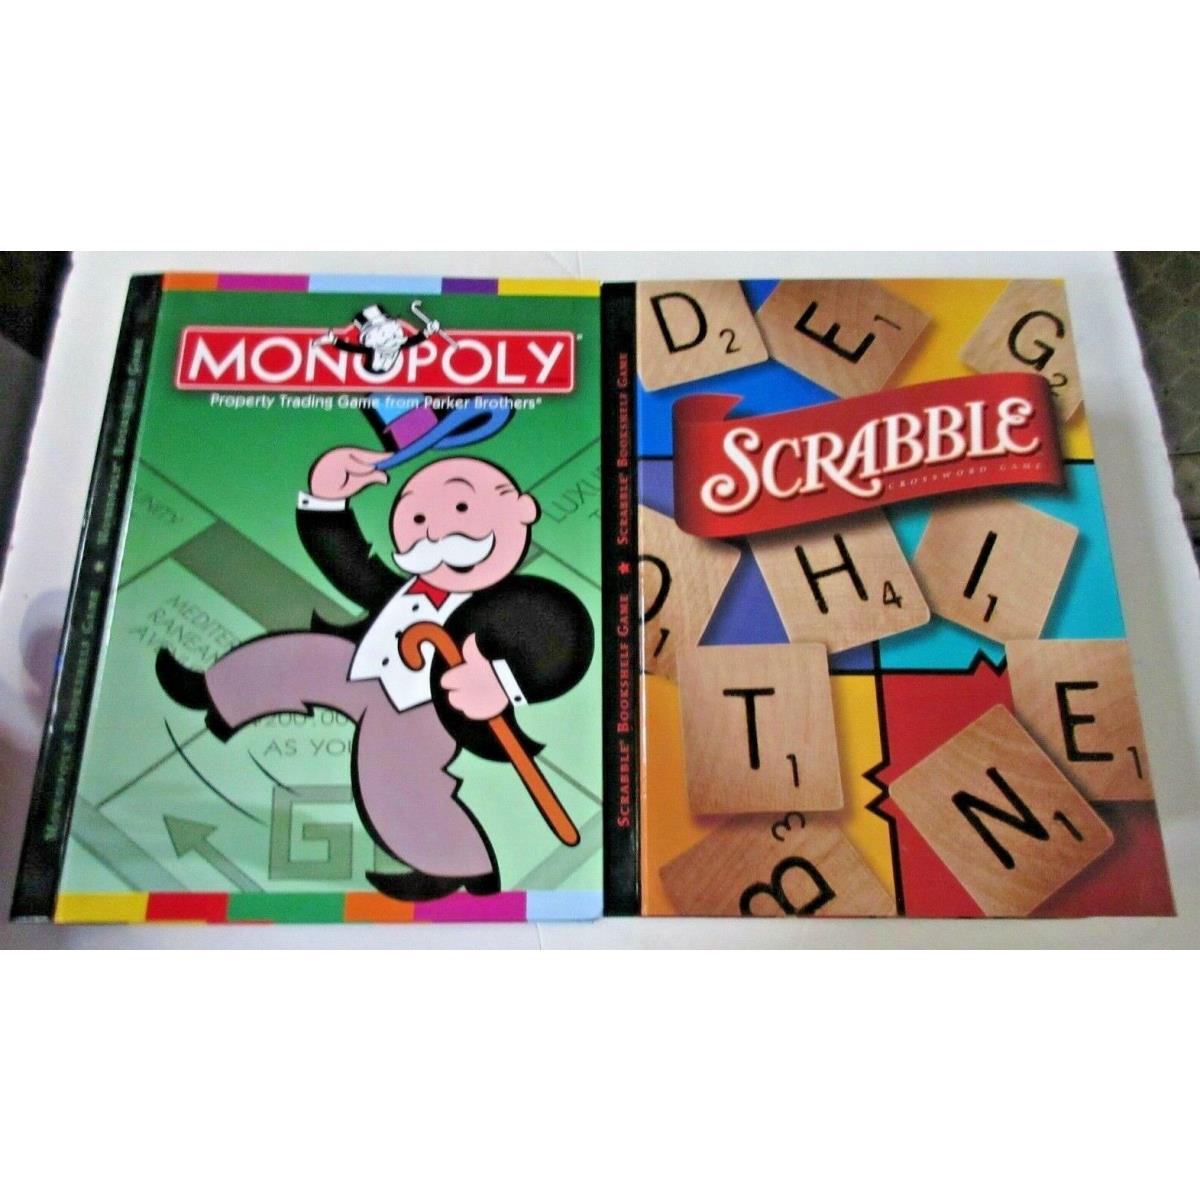 Scrabble and Monopoly Board Game Bookshelf Collection